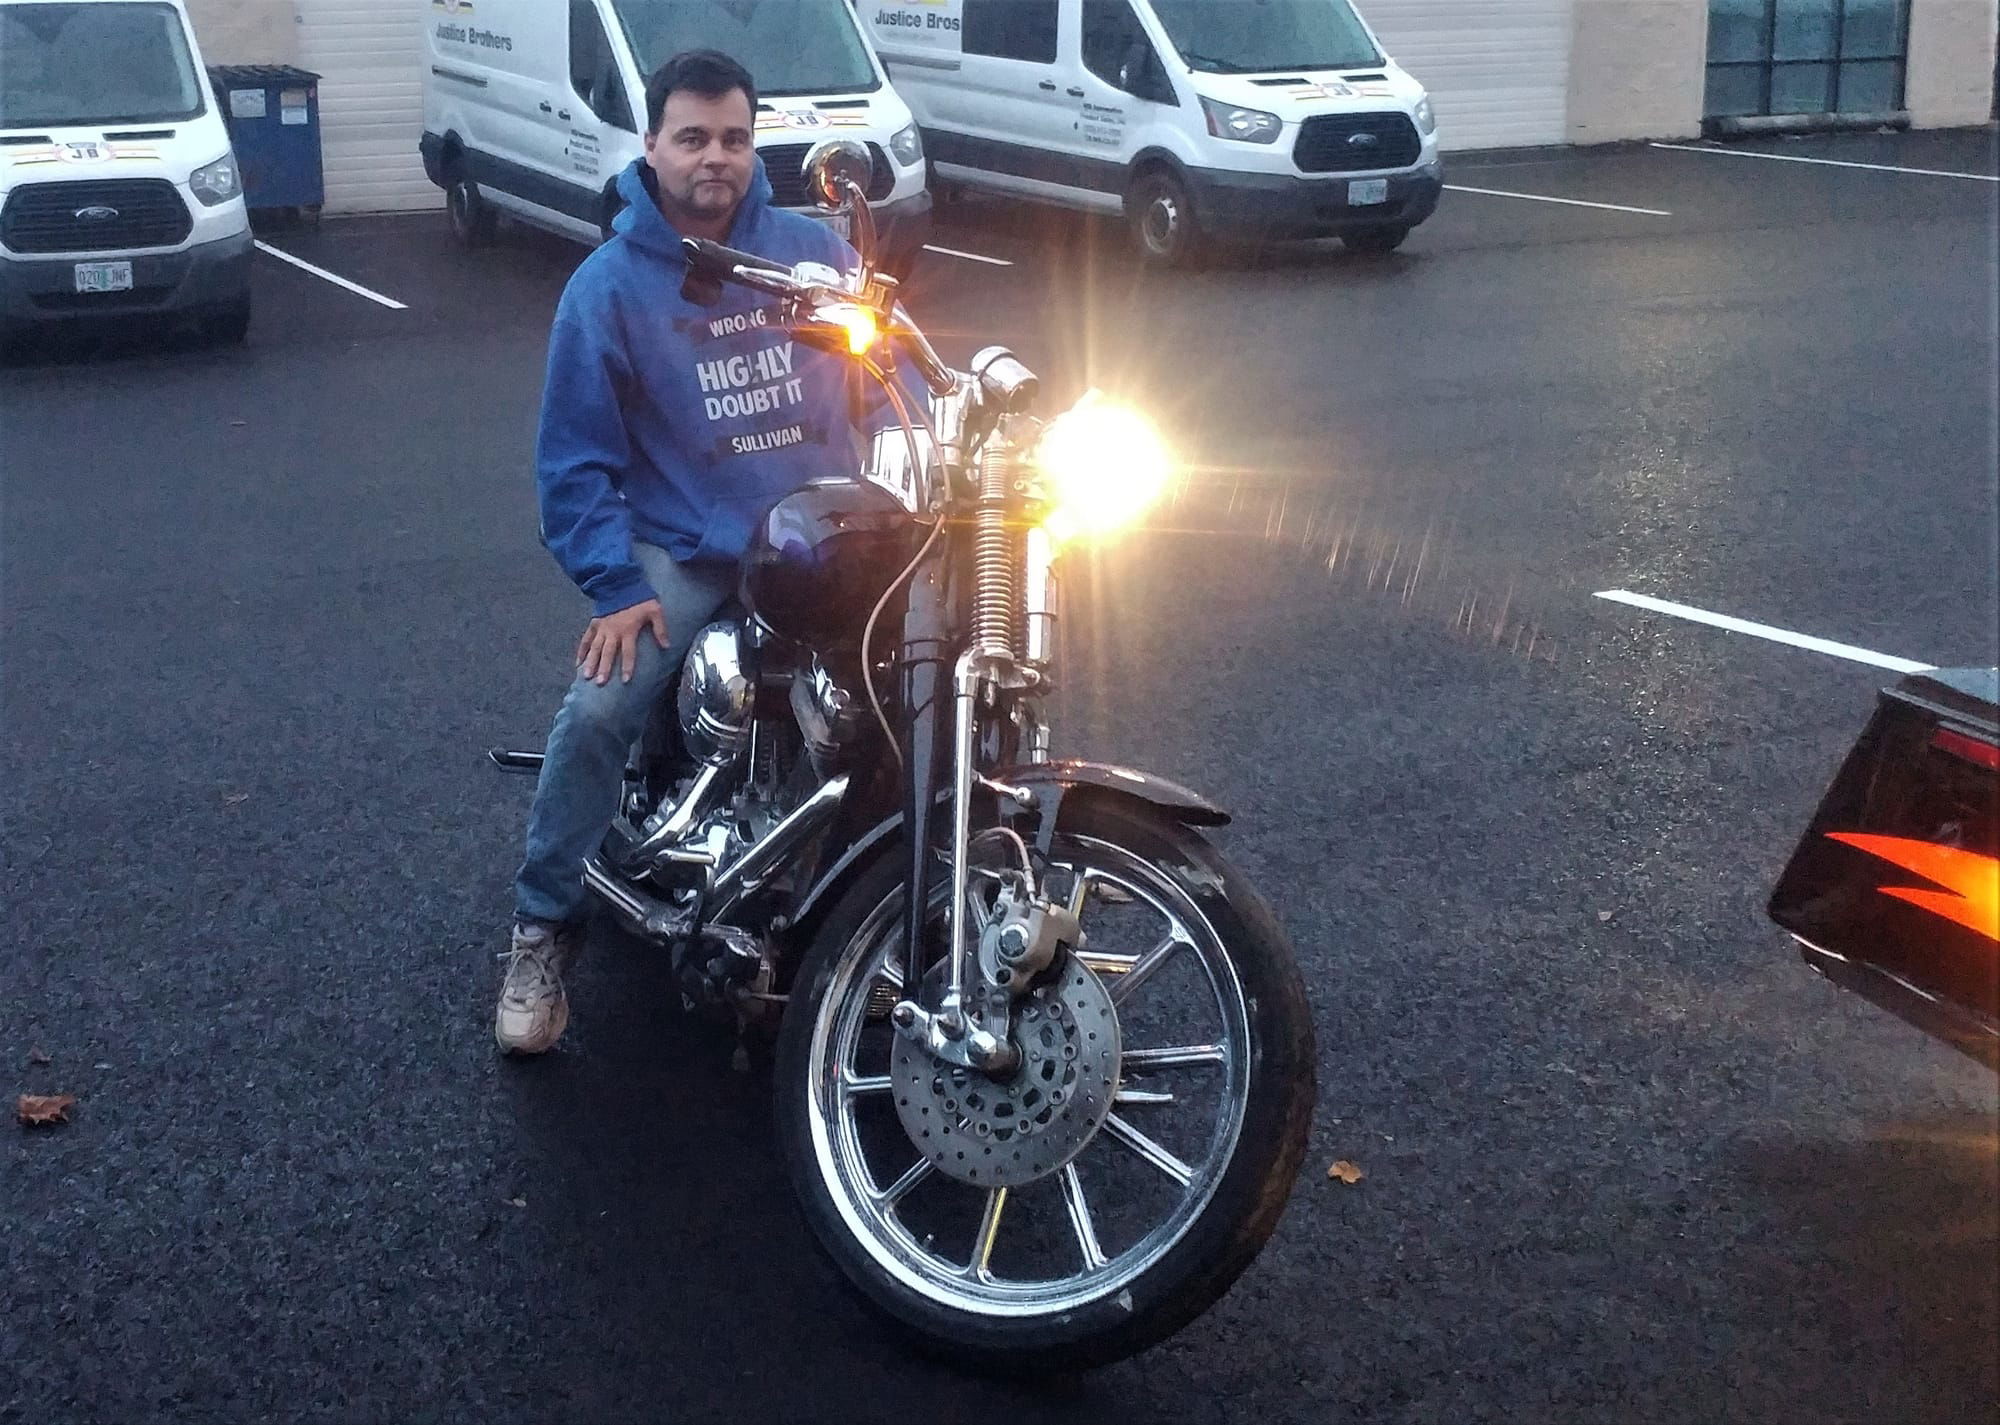 Jason S. Picking up his 2007 CVO Springer. Riding it back home. Thanks Jason  Gold Hill OR.